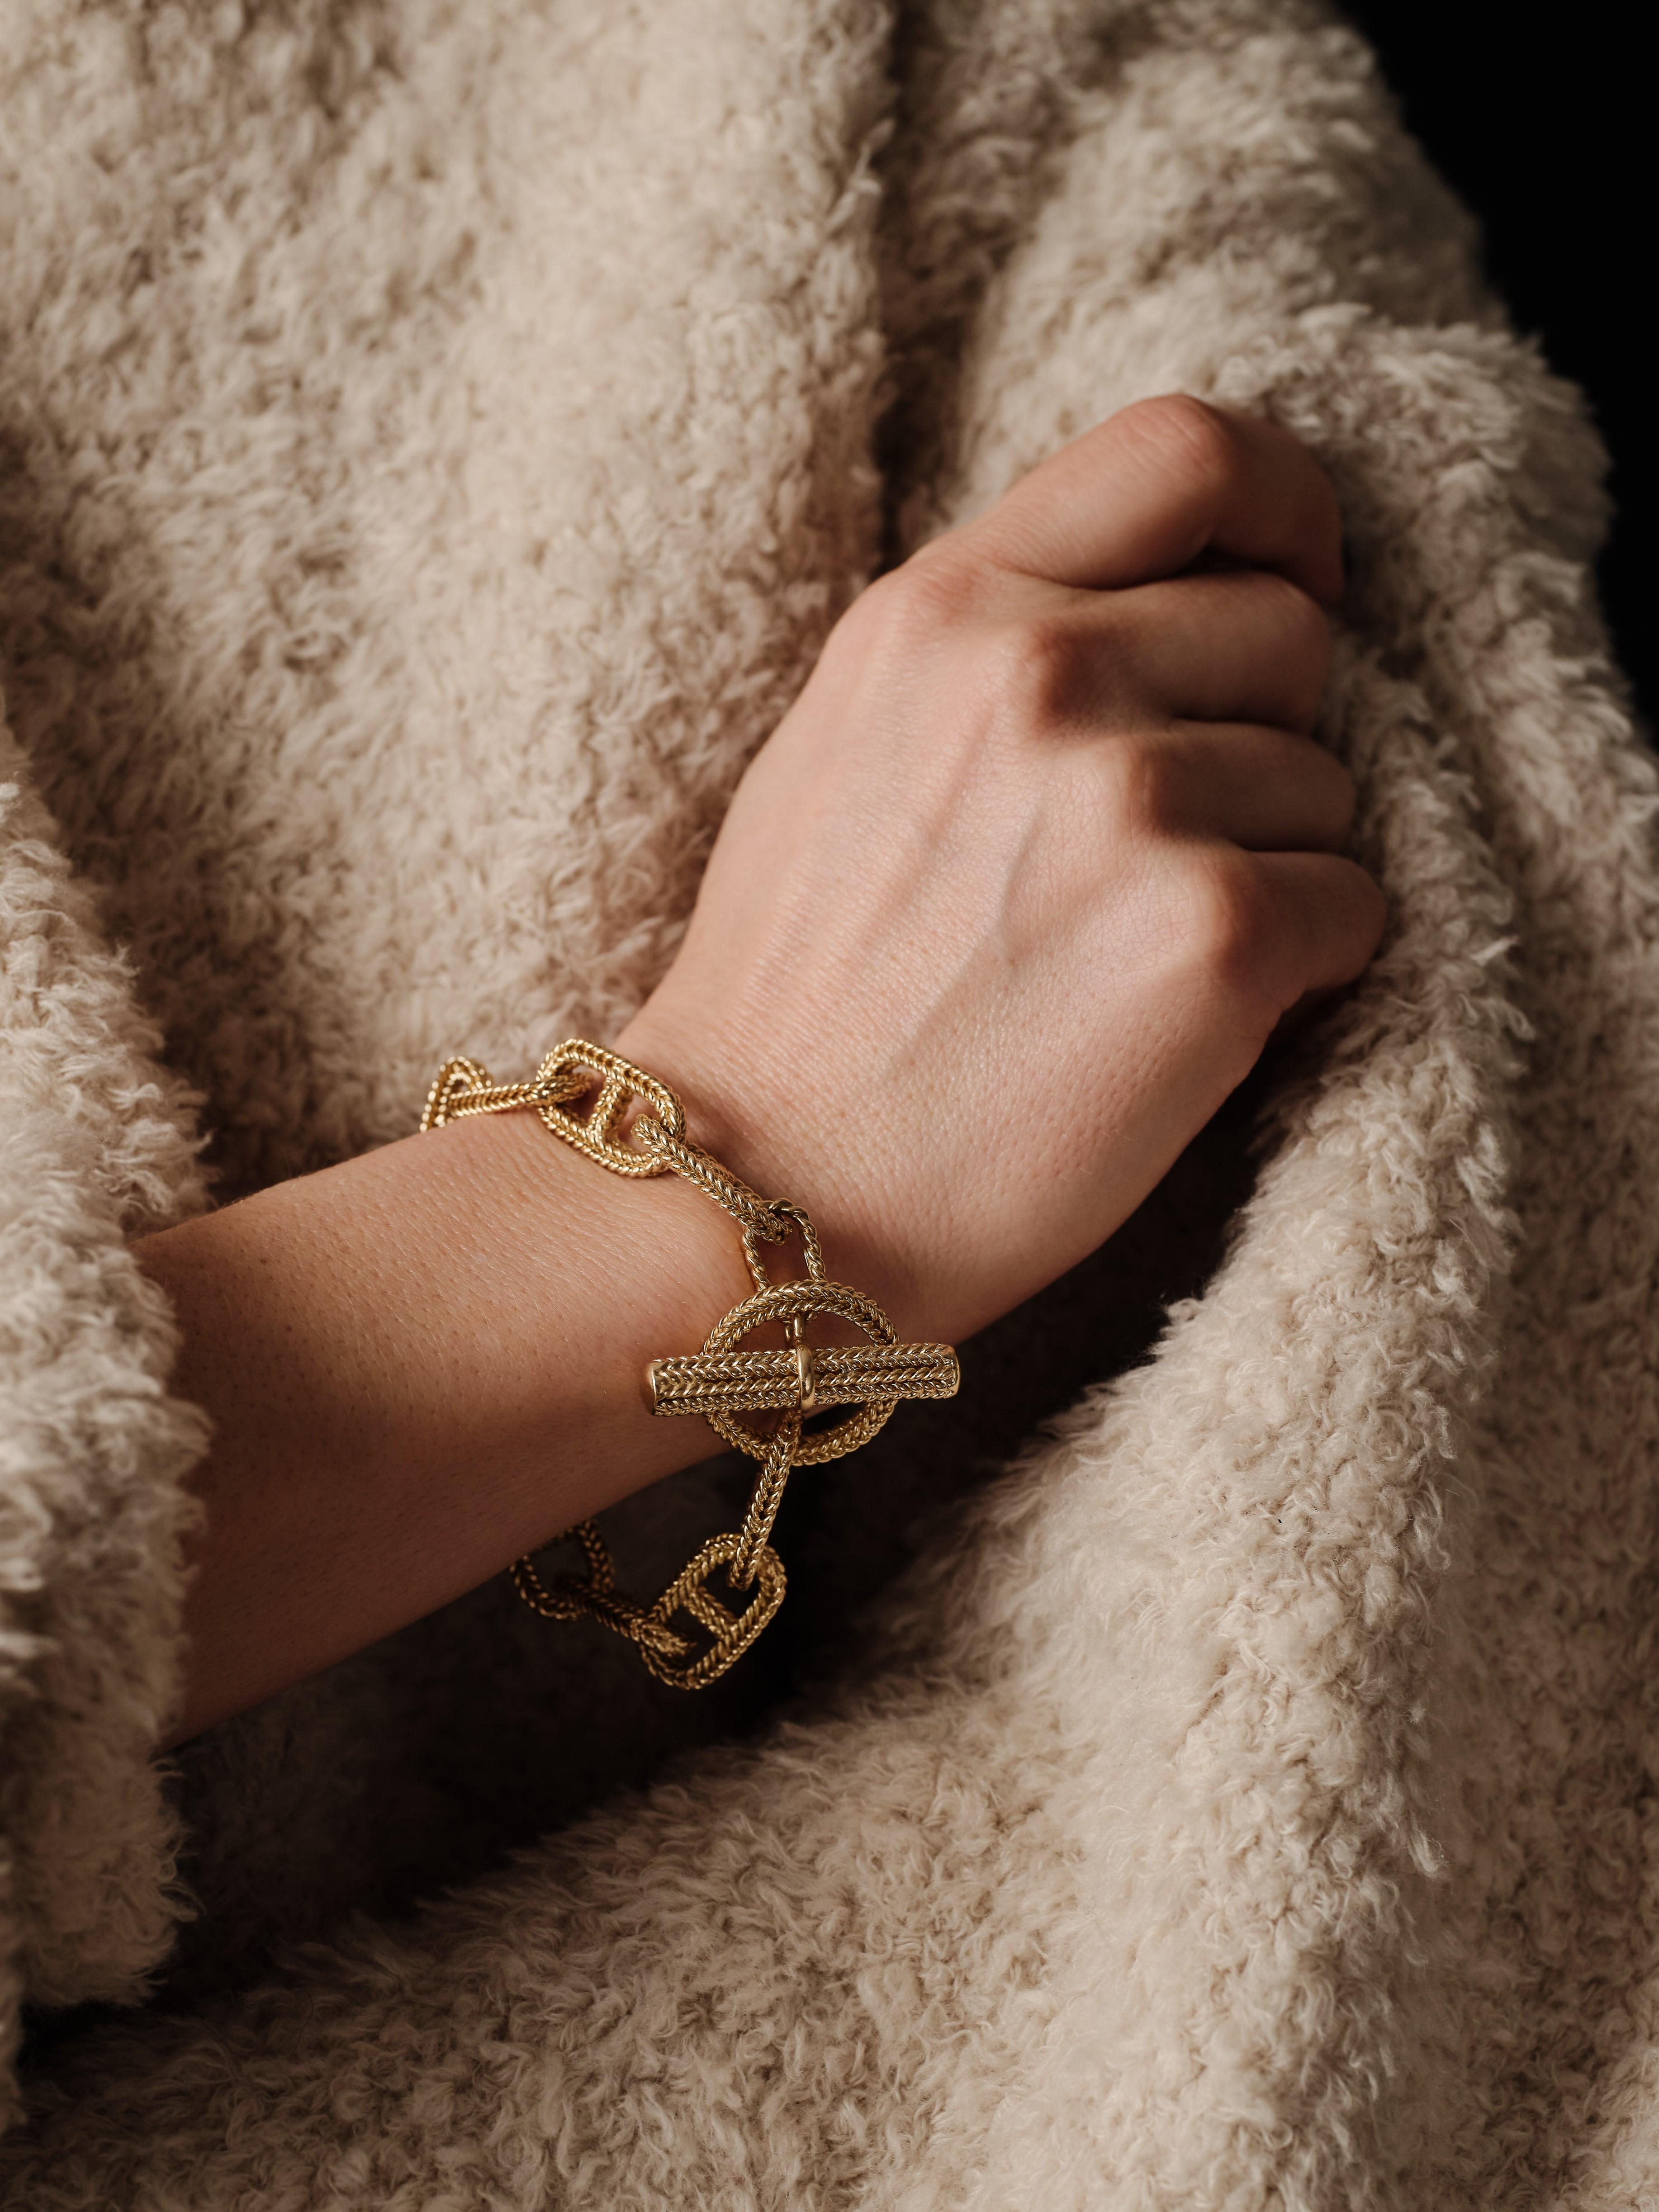 An 18kt gold iconic braided marine mesh Chaine d’Ancre bracelet, with toggle clasp.

The design, first introduced by Hermès in the early 1930s, was inspired by anchor chains used on ships, which serve as a symbol of strength and stability. A